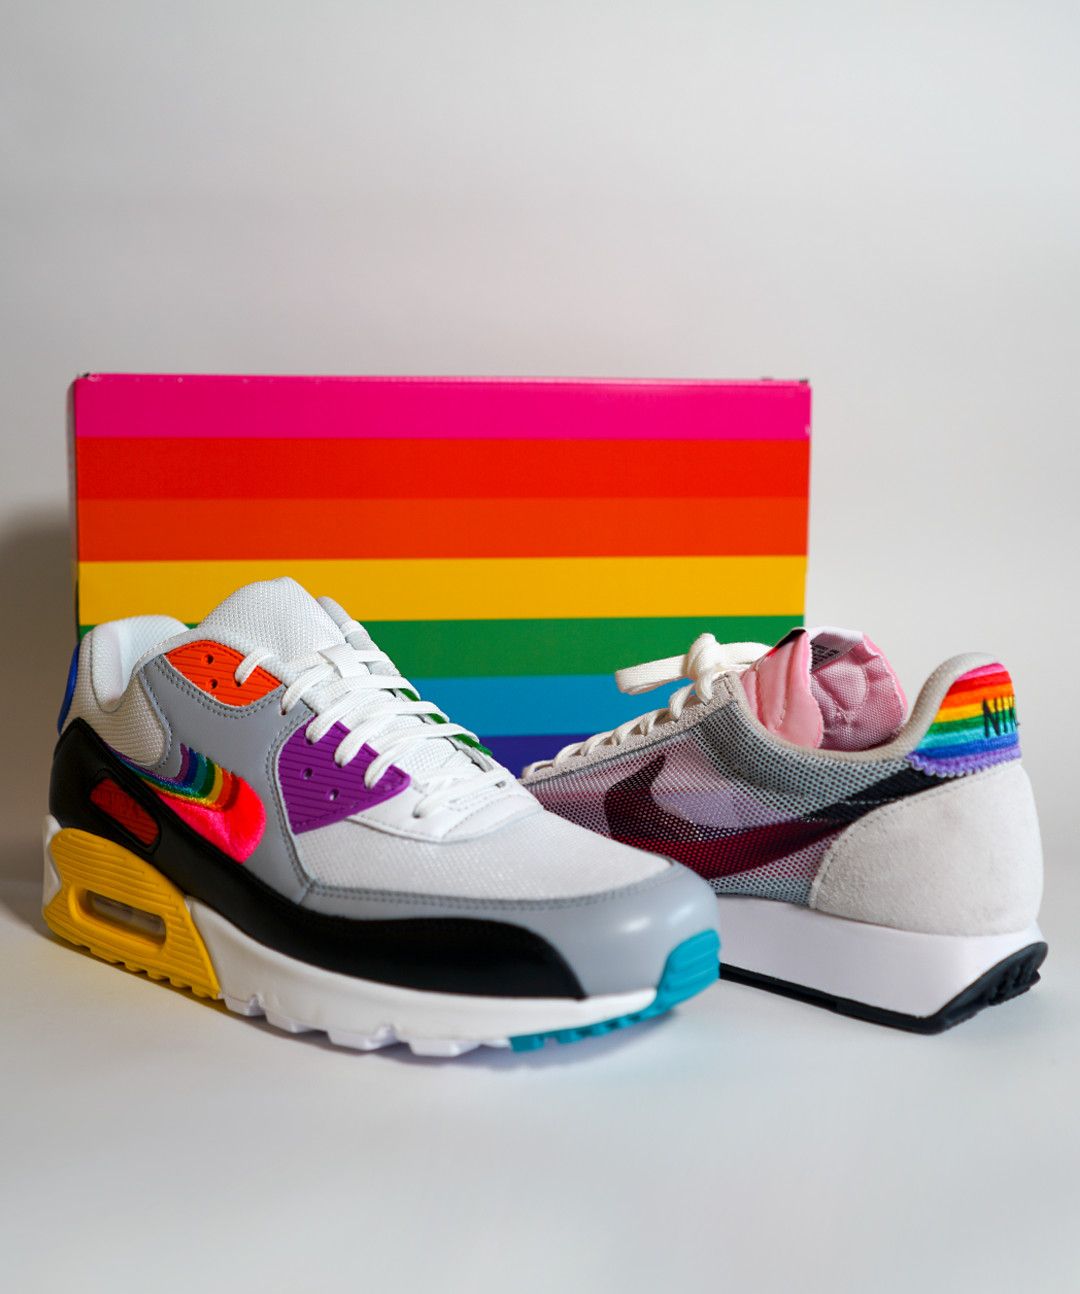 novela Misterio ensayo Nike BETRUE Air Max 90 and Tailwind 79 Sneakers - The Story of Nike's Be  True Collaboration with Gilbert Baker